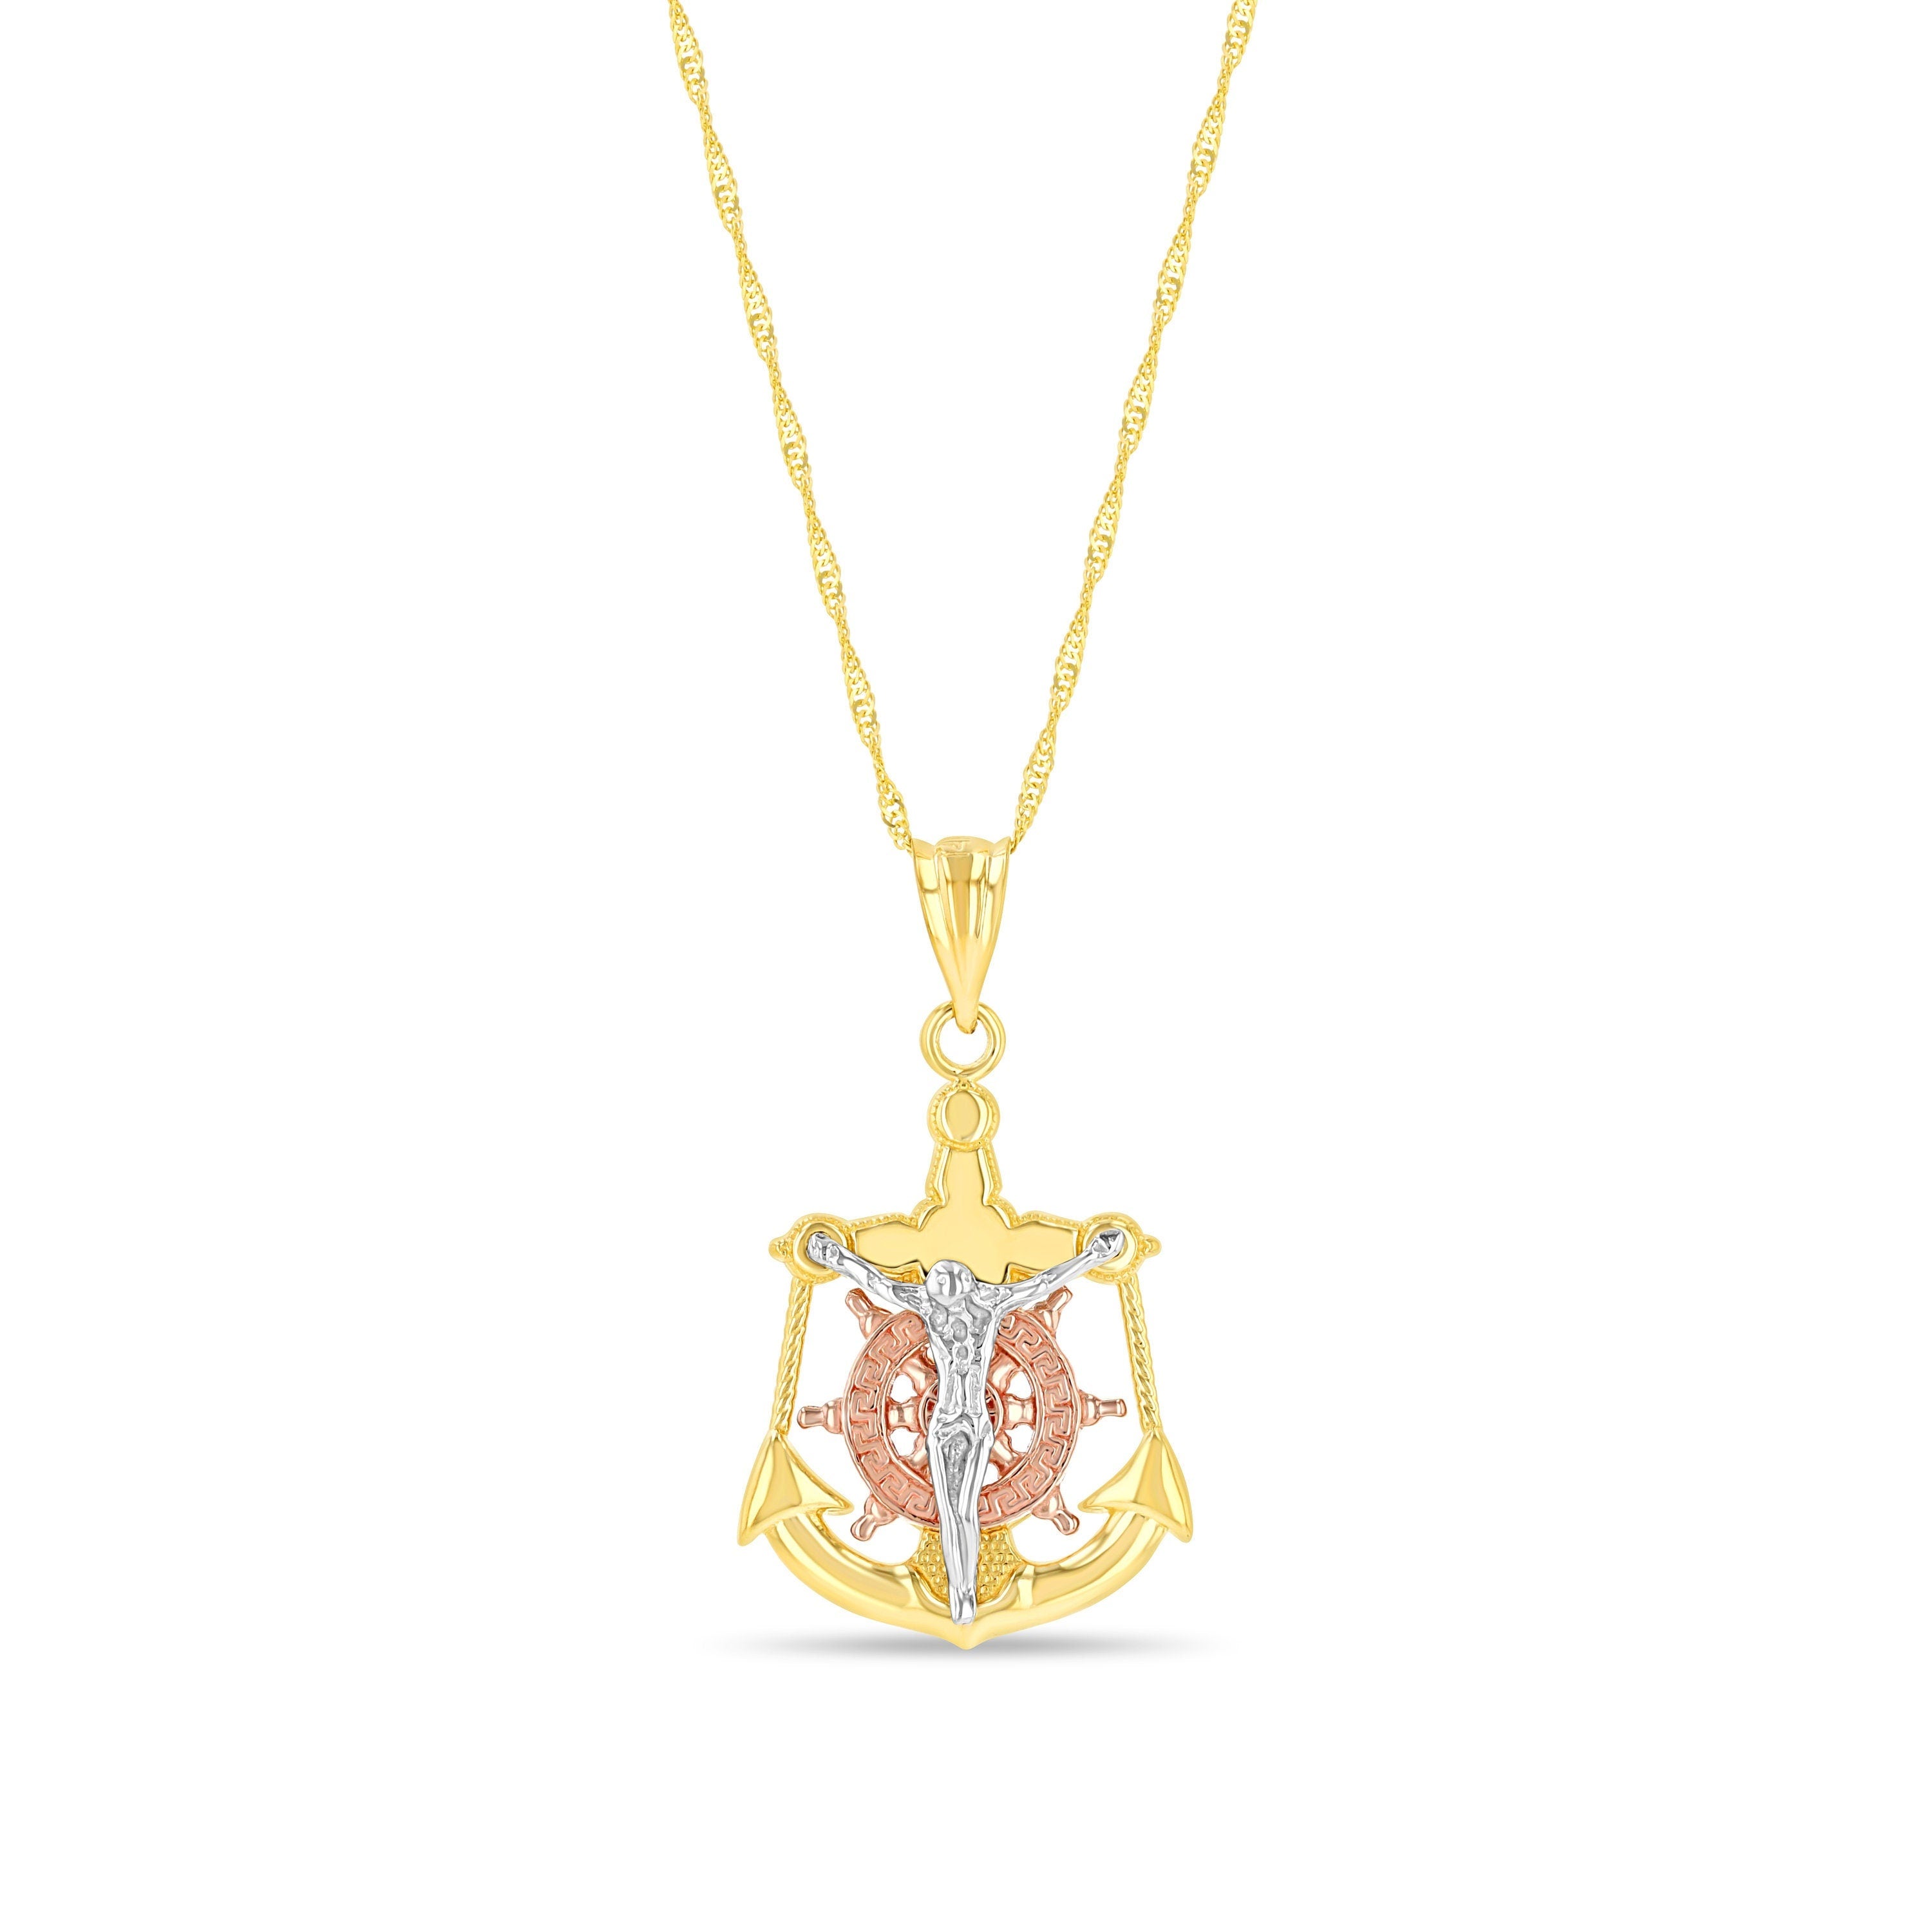 14k solid gold tri color mariner pendant on 18" solid gold chain